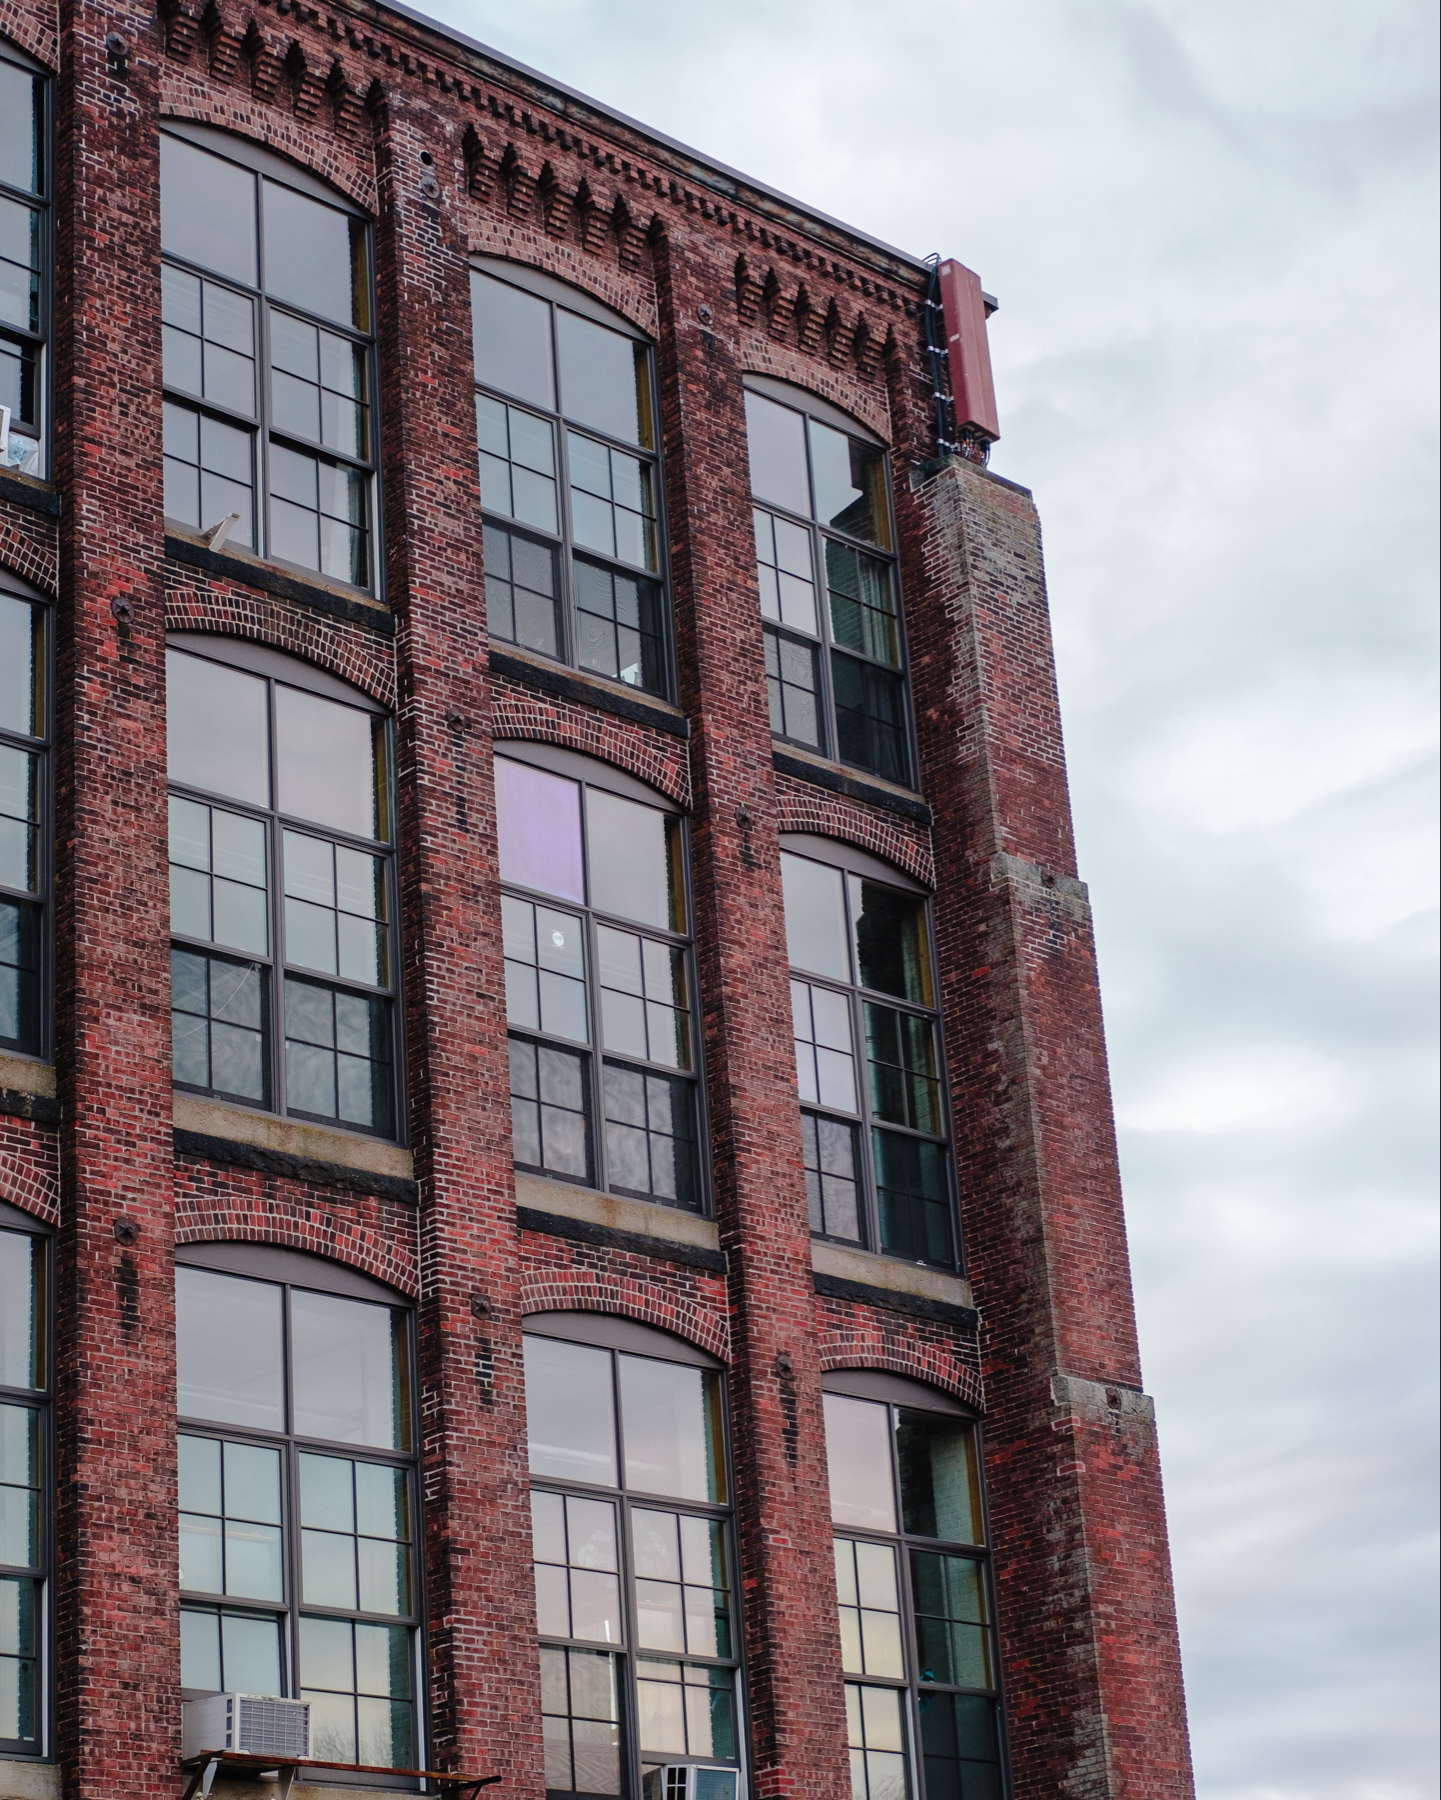 A tall red brick industrial building with large windows against a cloudy sky.